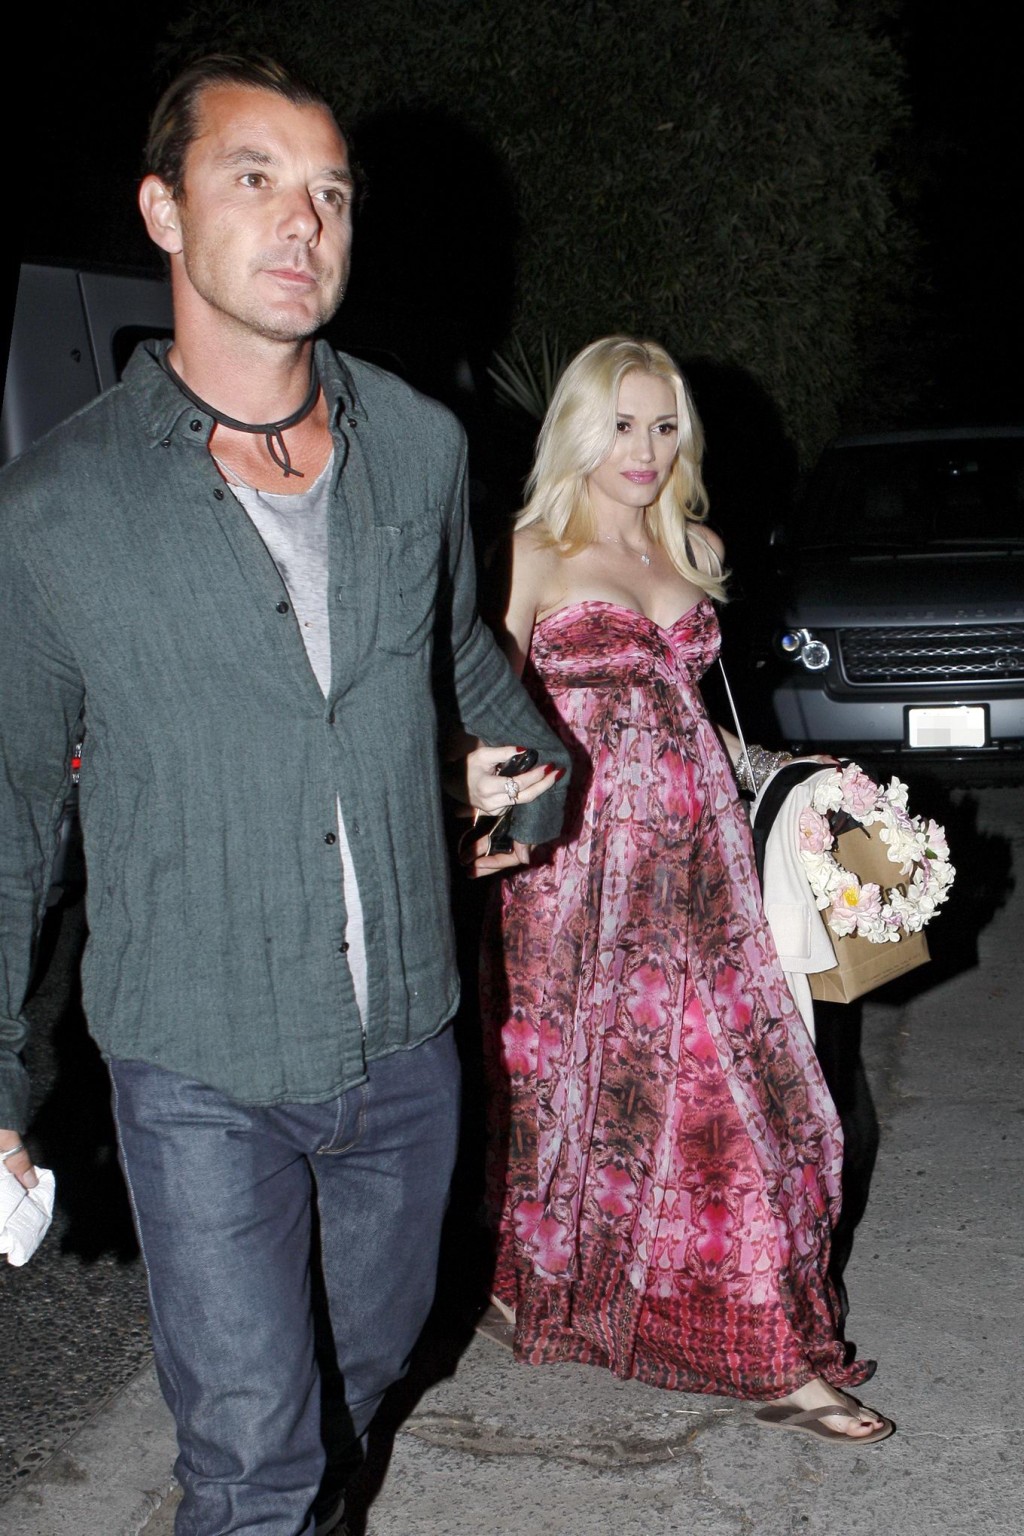 Gwen Stefani shows off her breast implants wearing a strapless dress outside a f #75214231